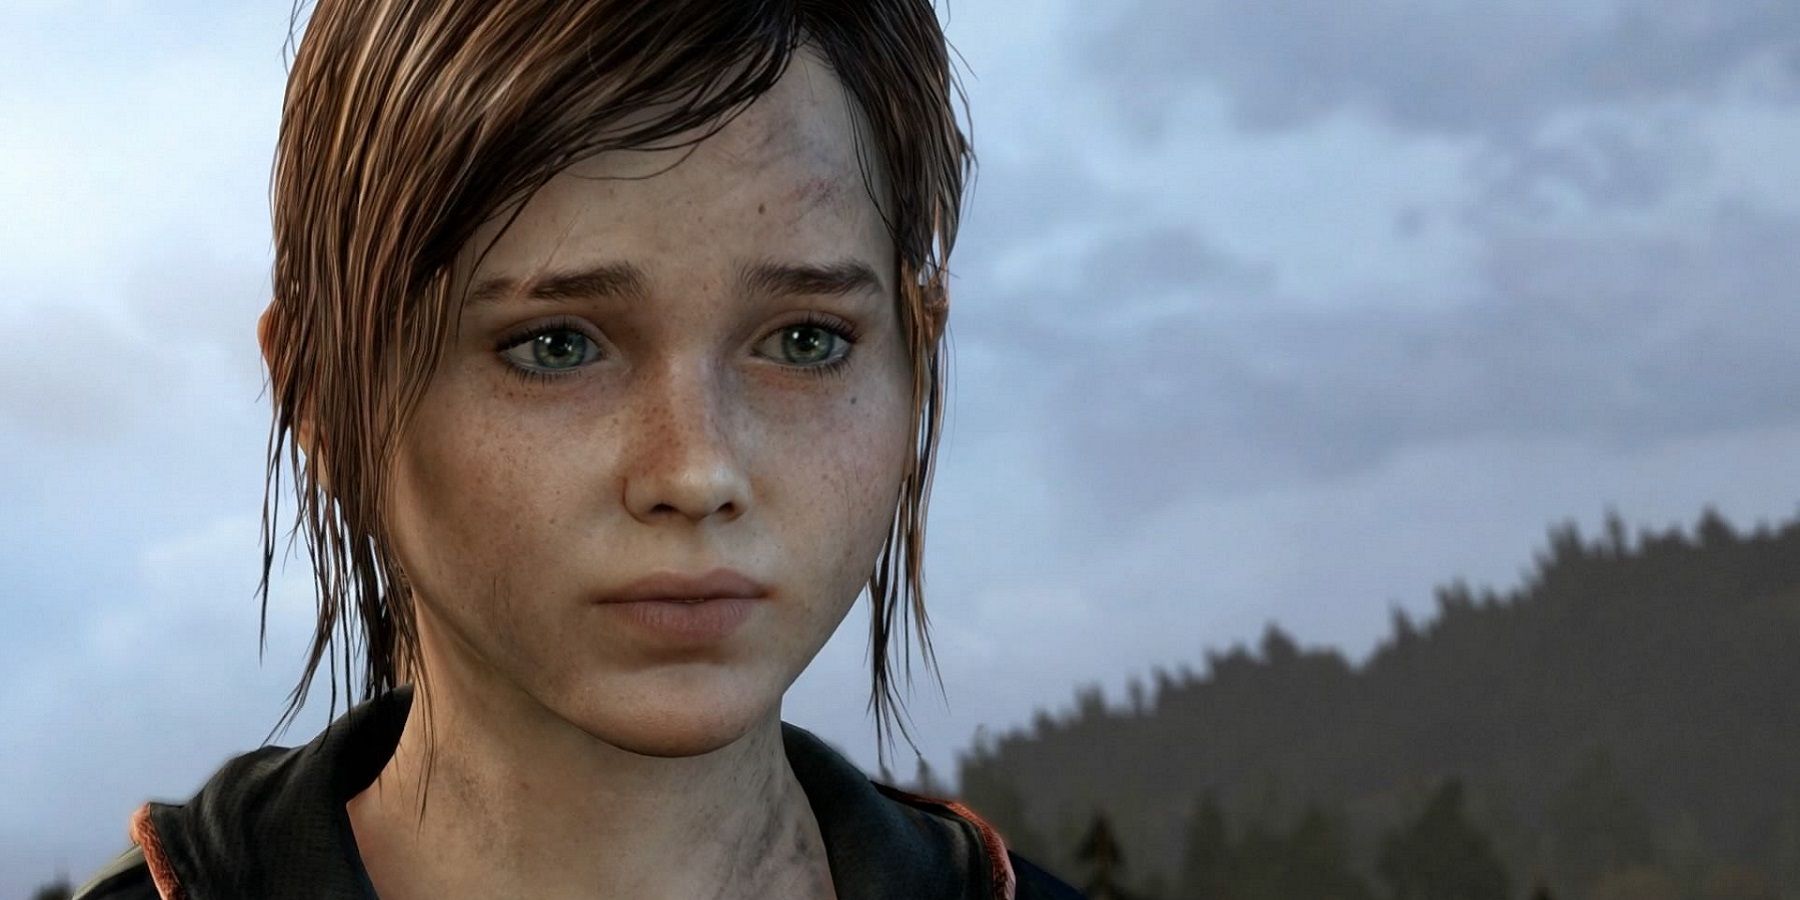 Image from The Last of Us showing a close-up of Ellie.